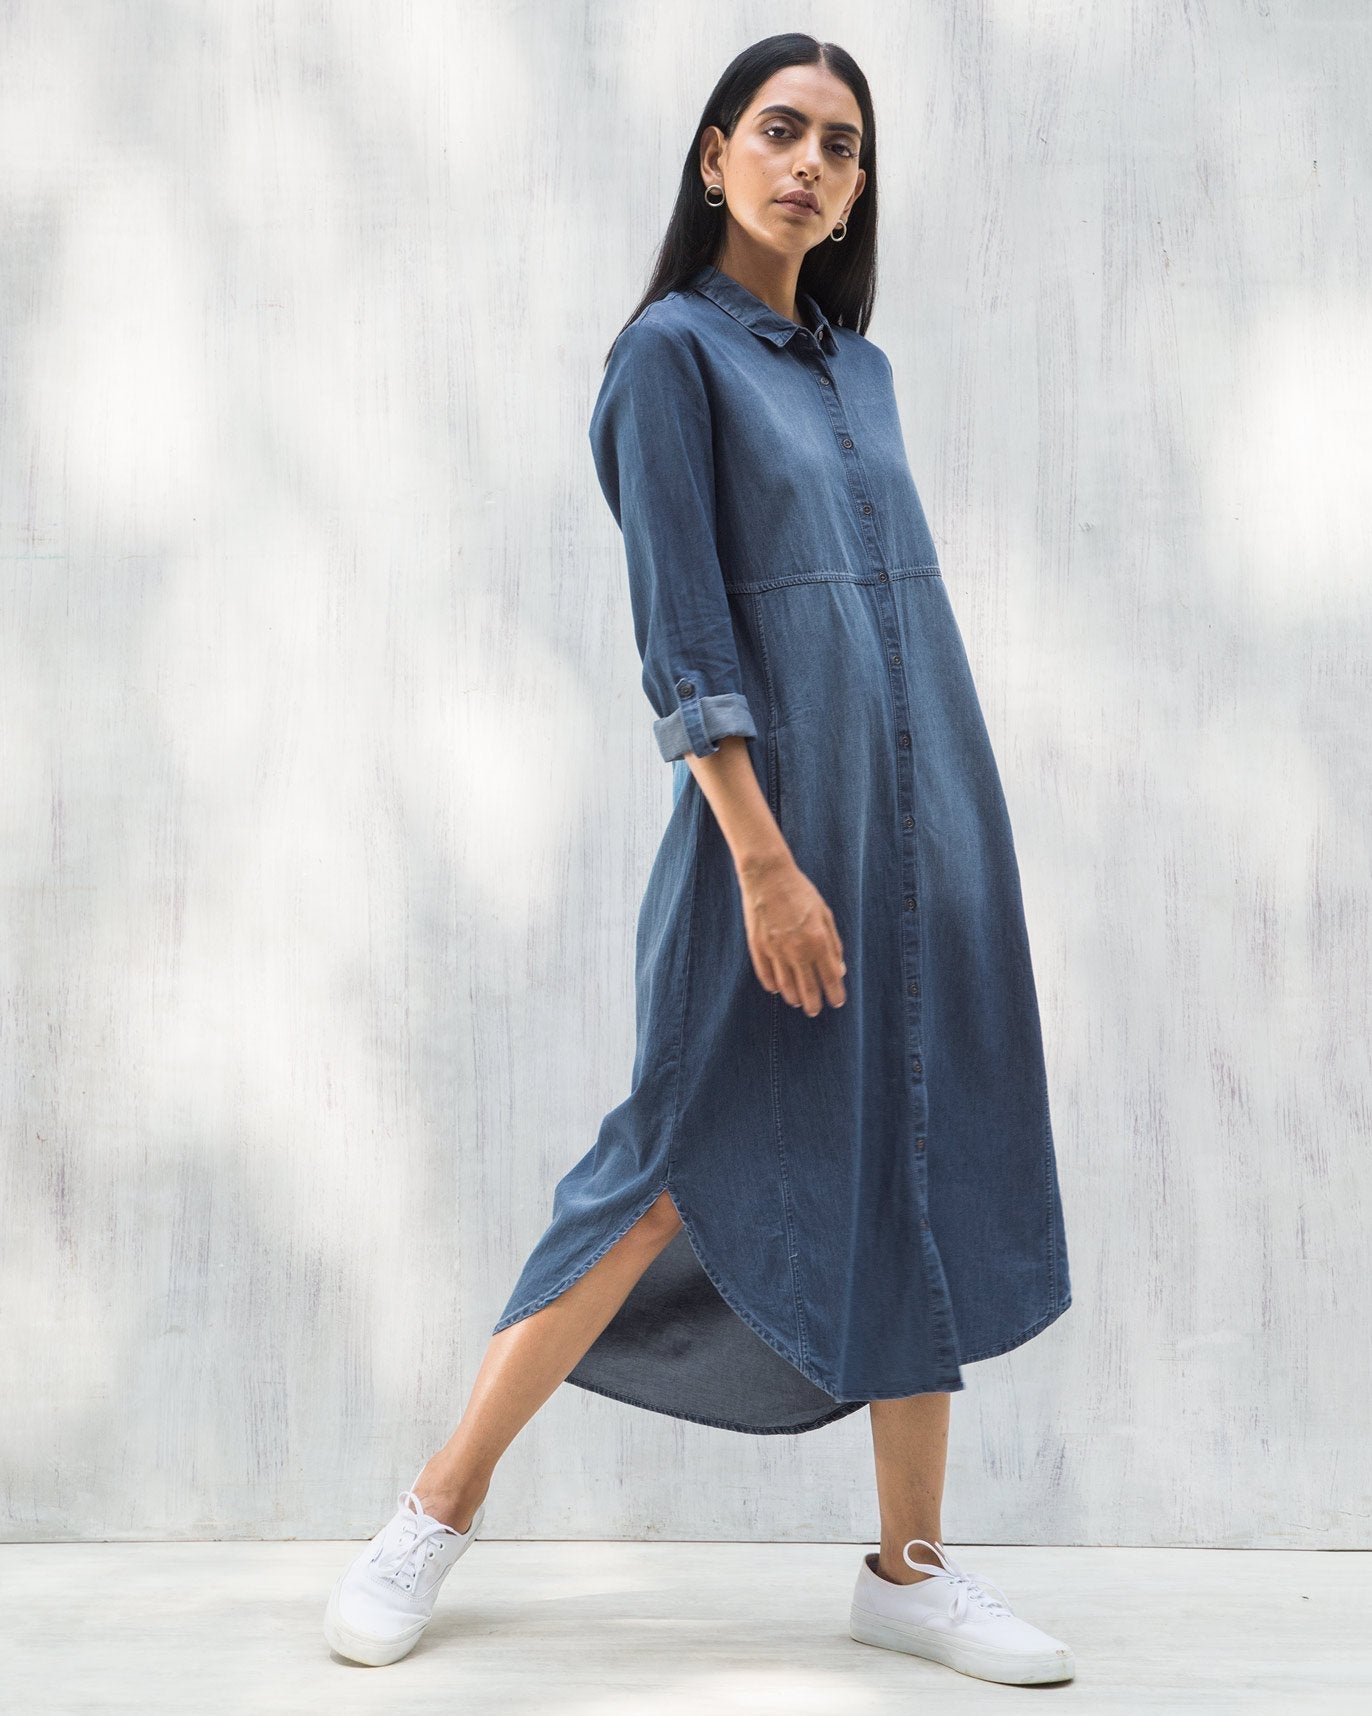 Tea Length Shirt Dress (Style Pantry) | Elegant shirt dress, Chic outfits,  Classy outfits